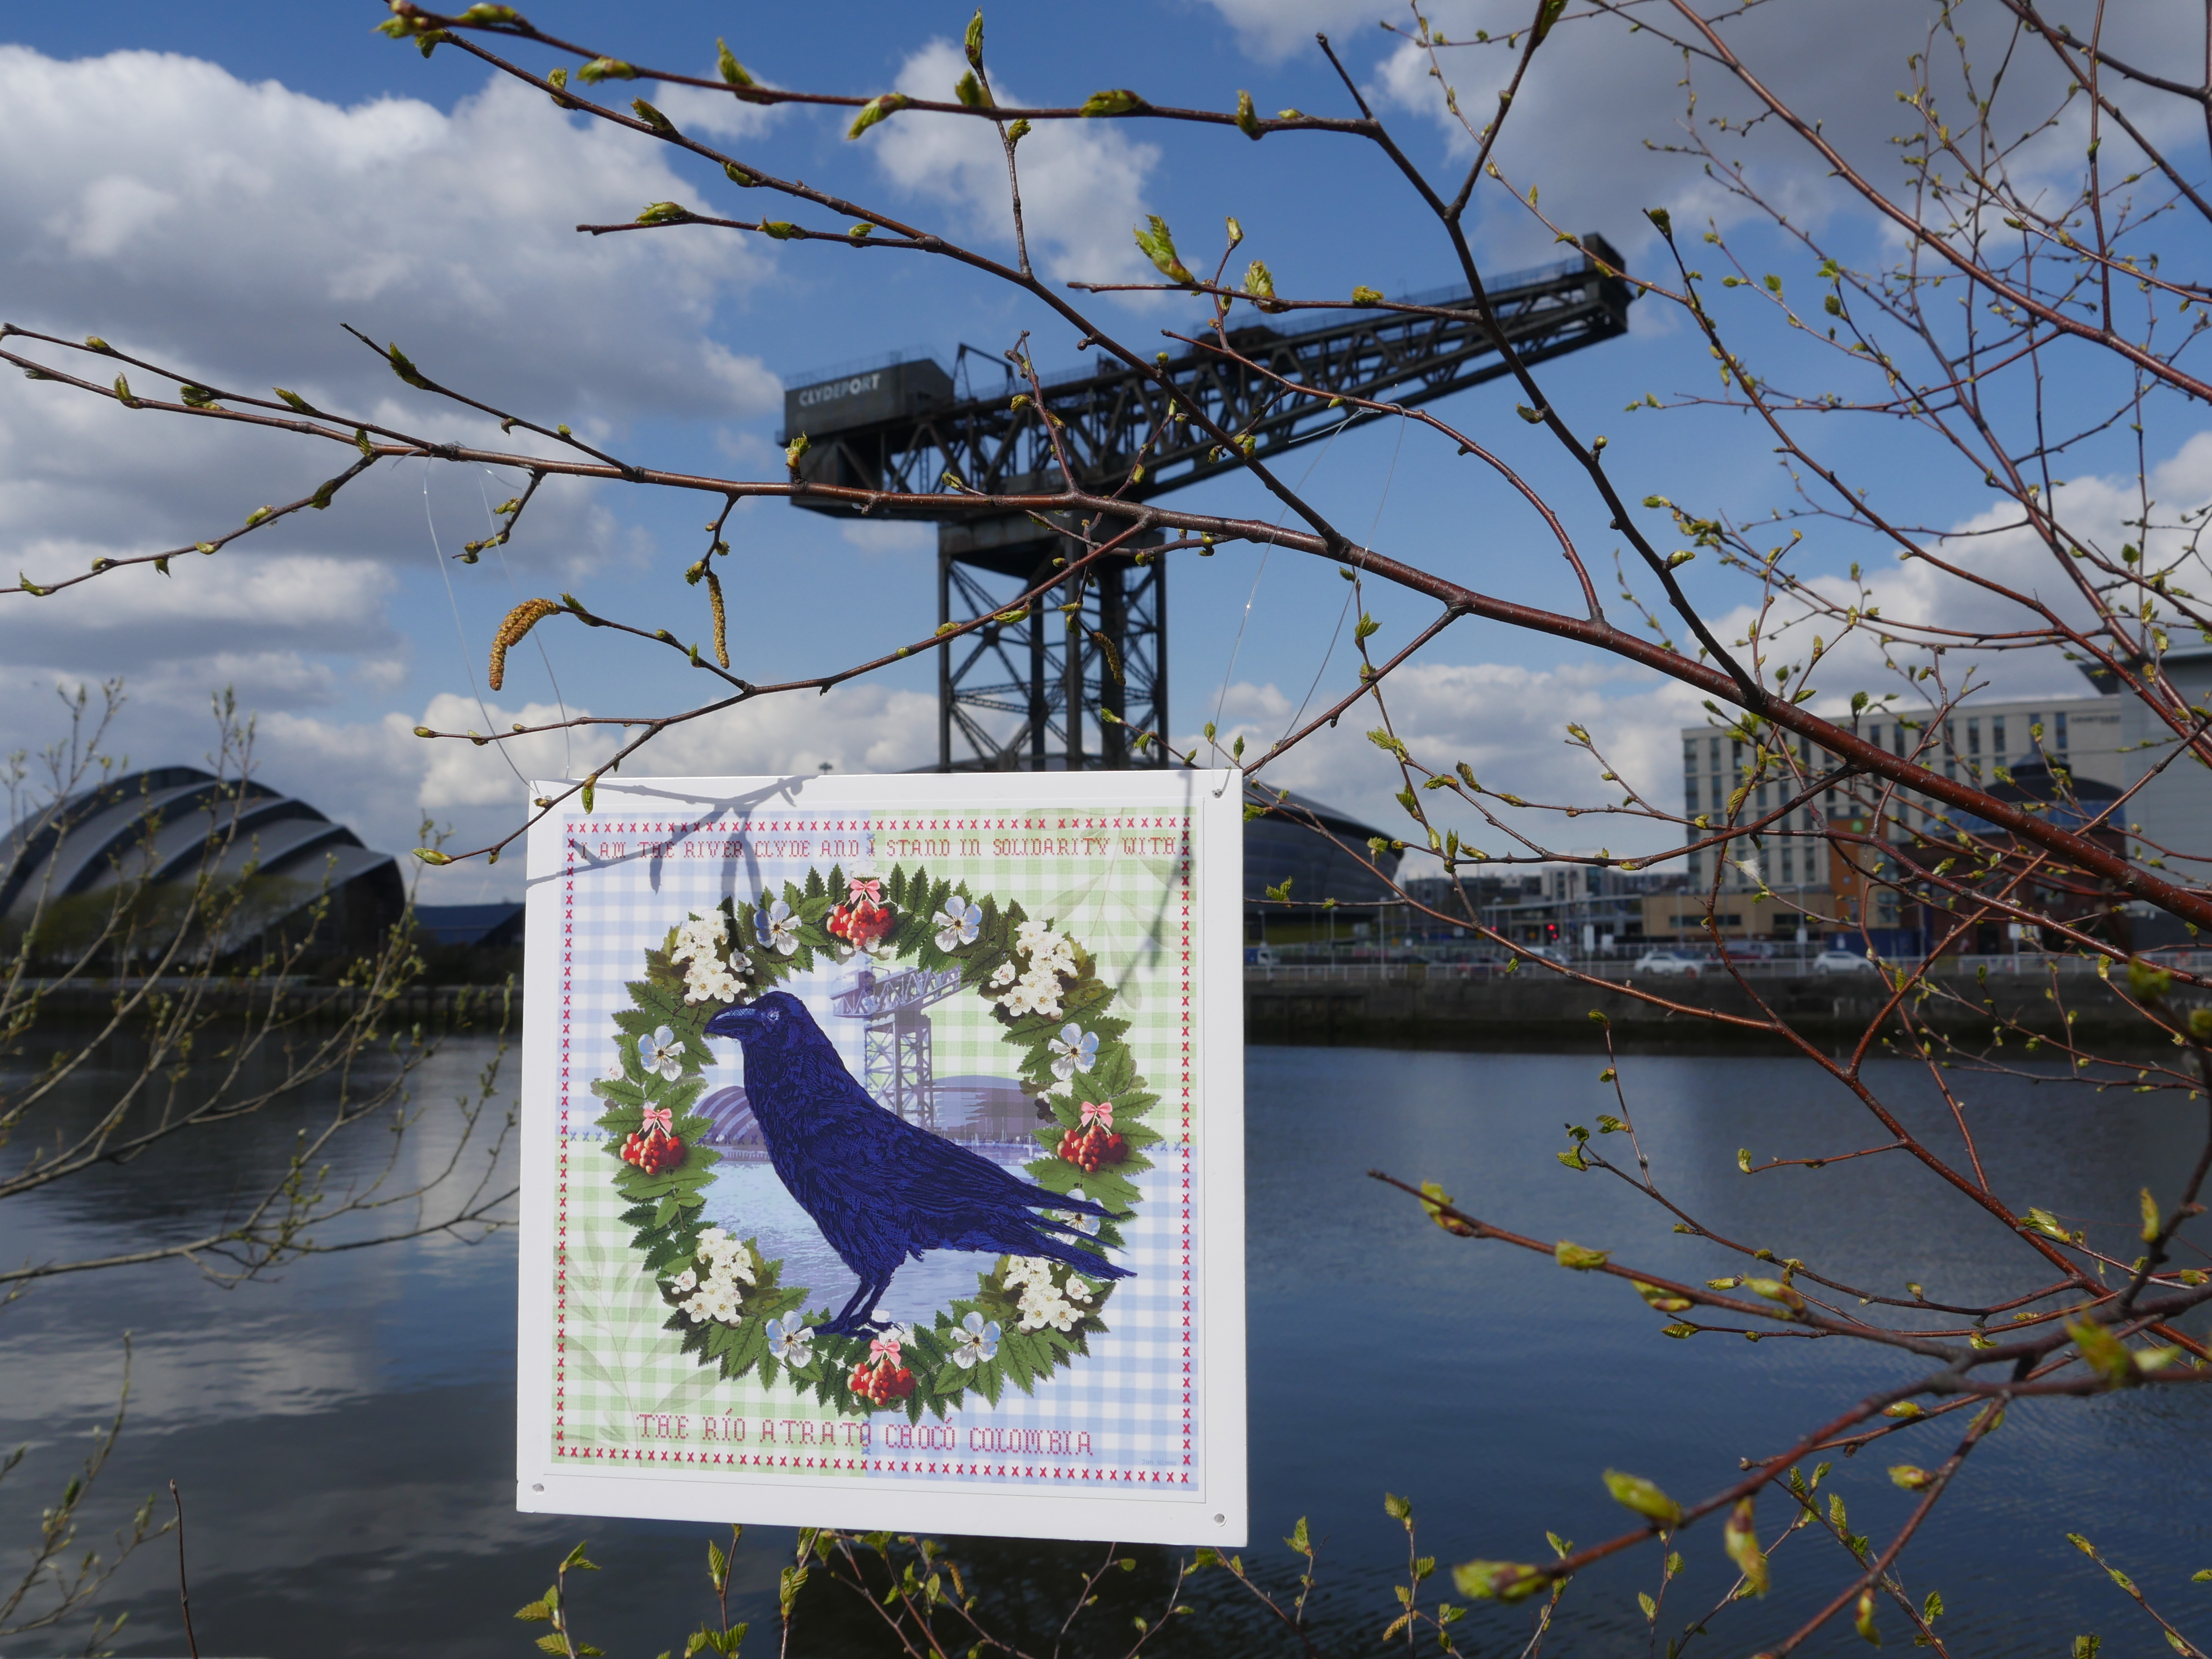 Artwork of a Raven at the Clyde